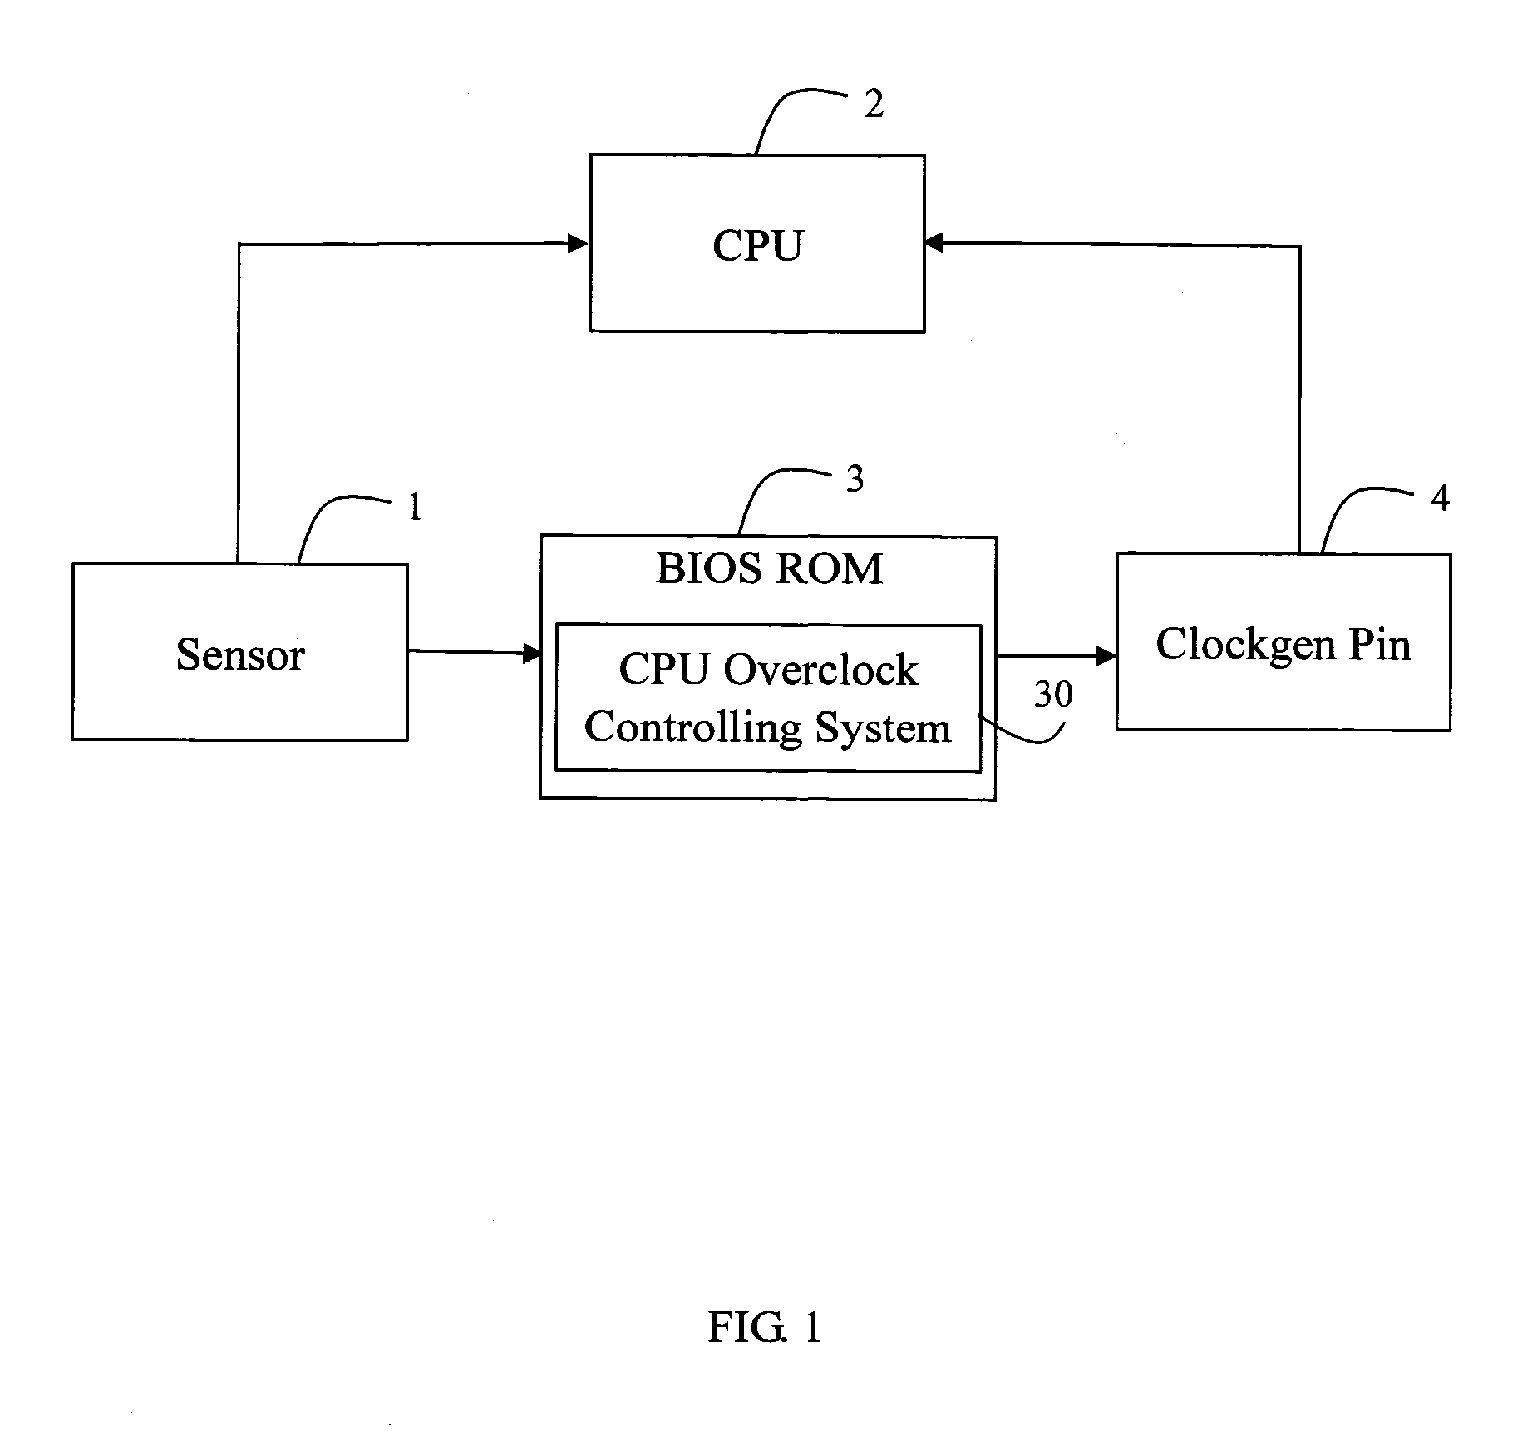 System and method for controlling CPU overclocking